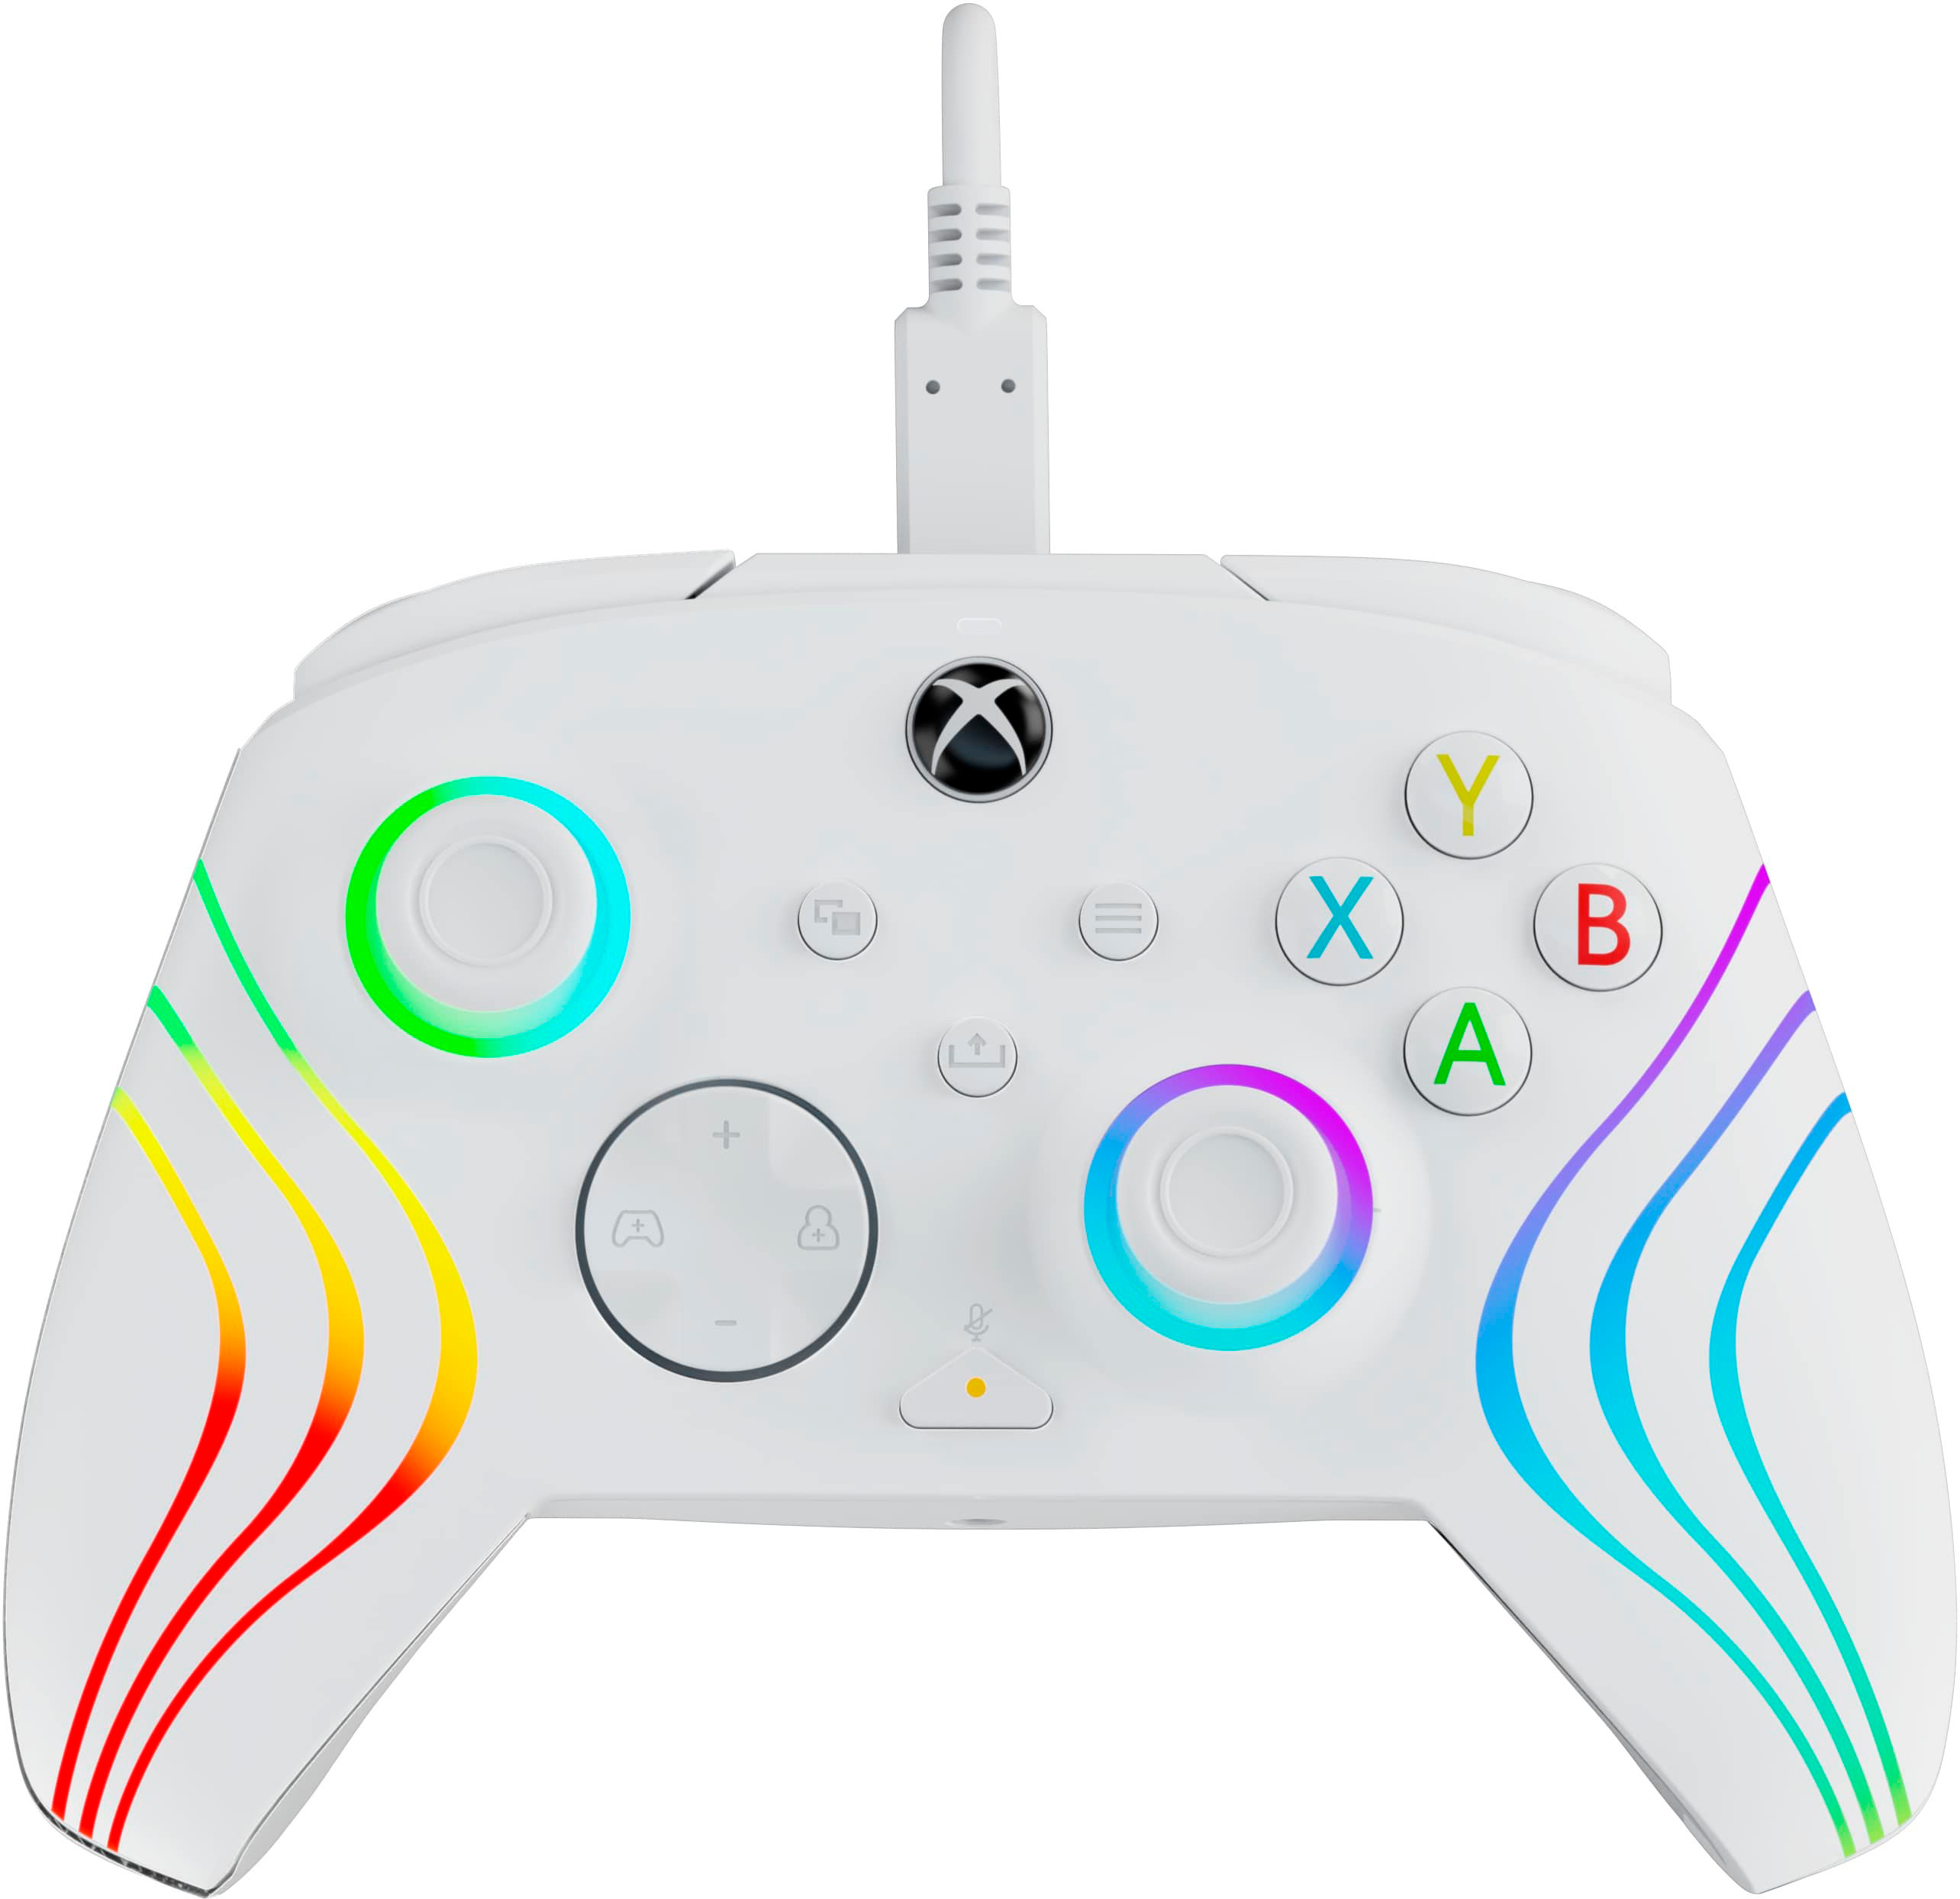 Xbox Series X|S & PC Black Afterglow Wave Controller